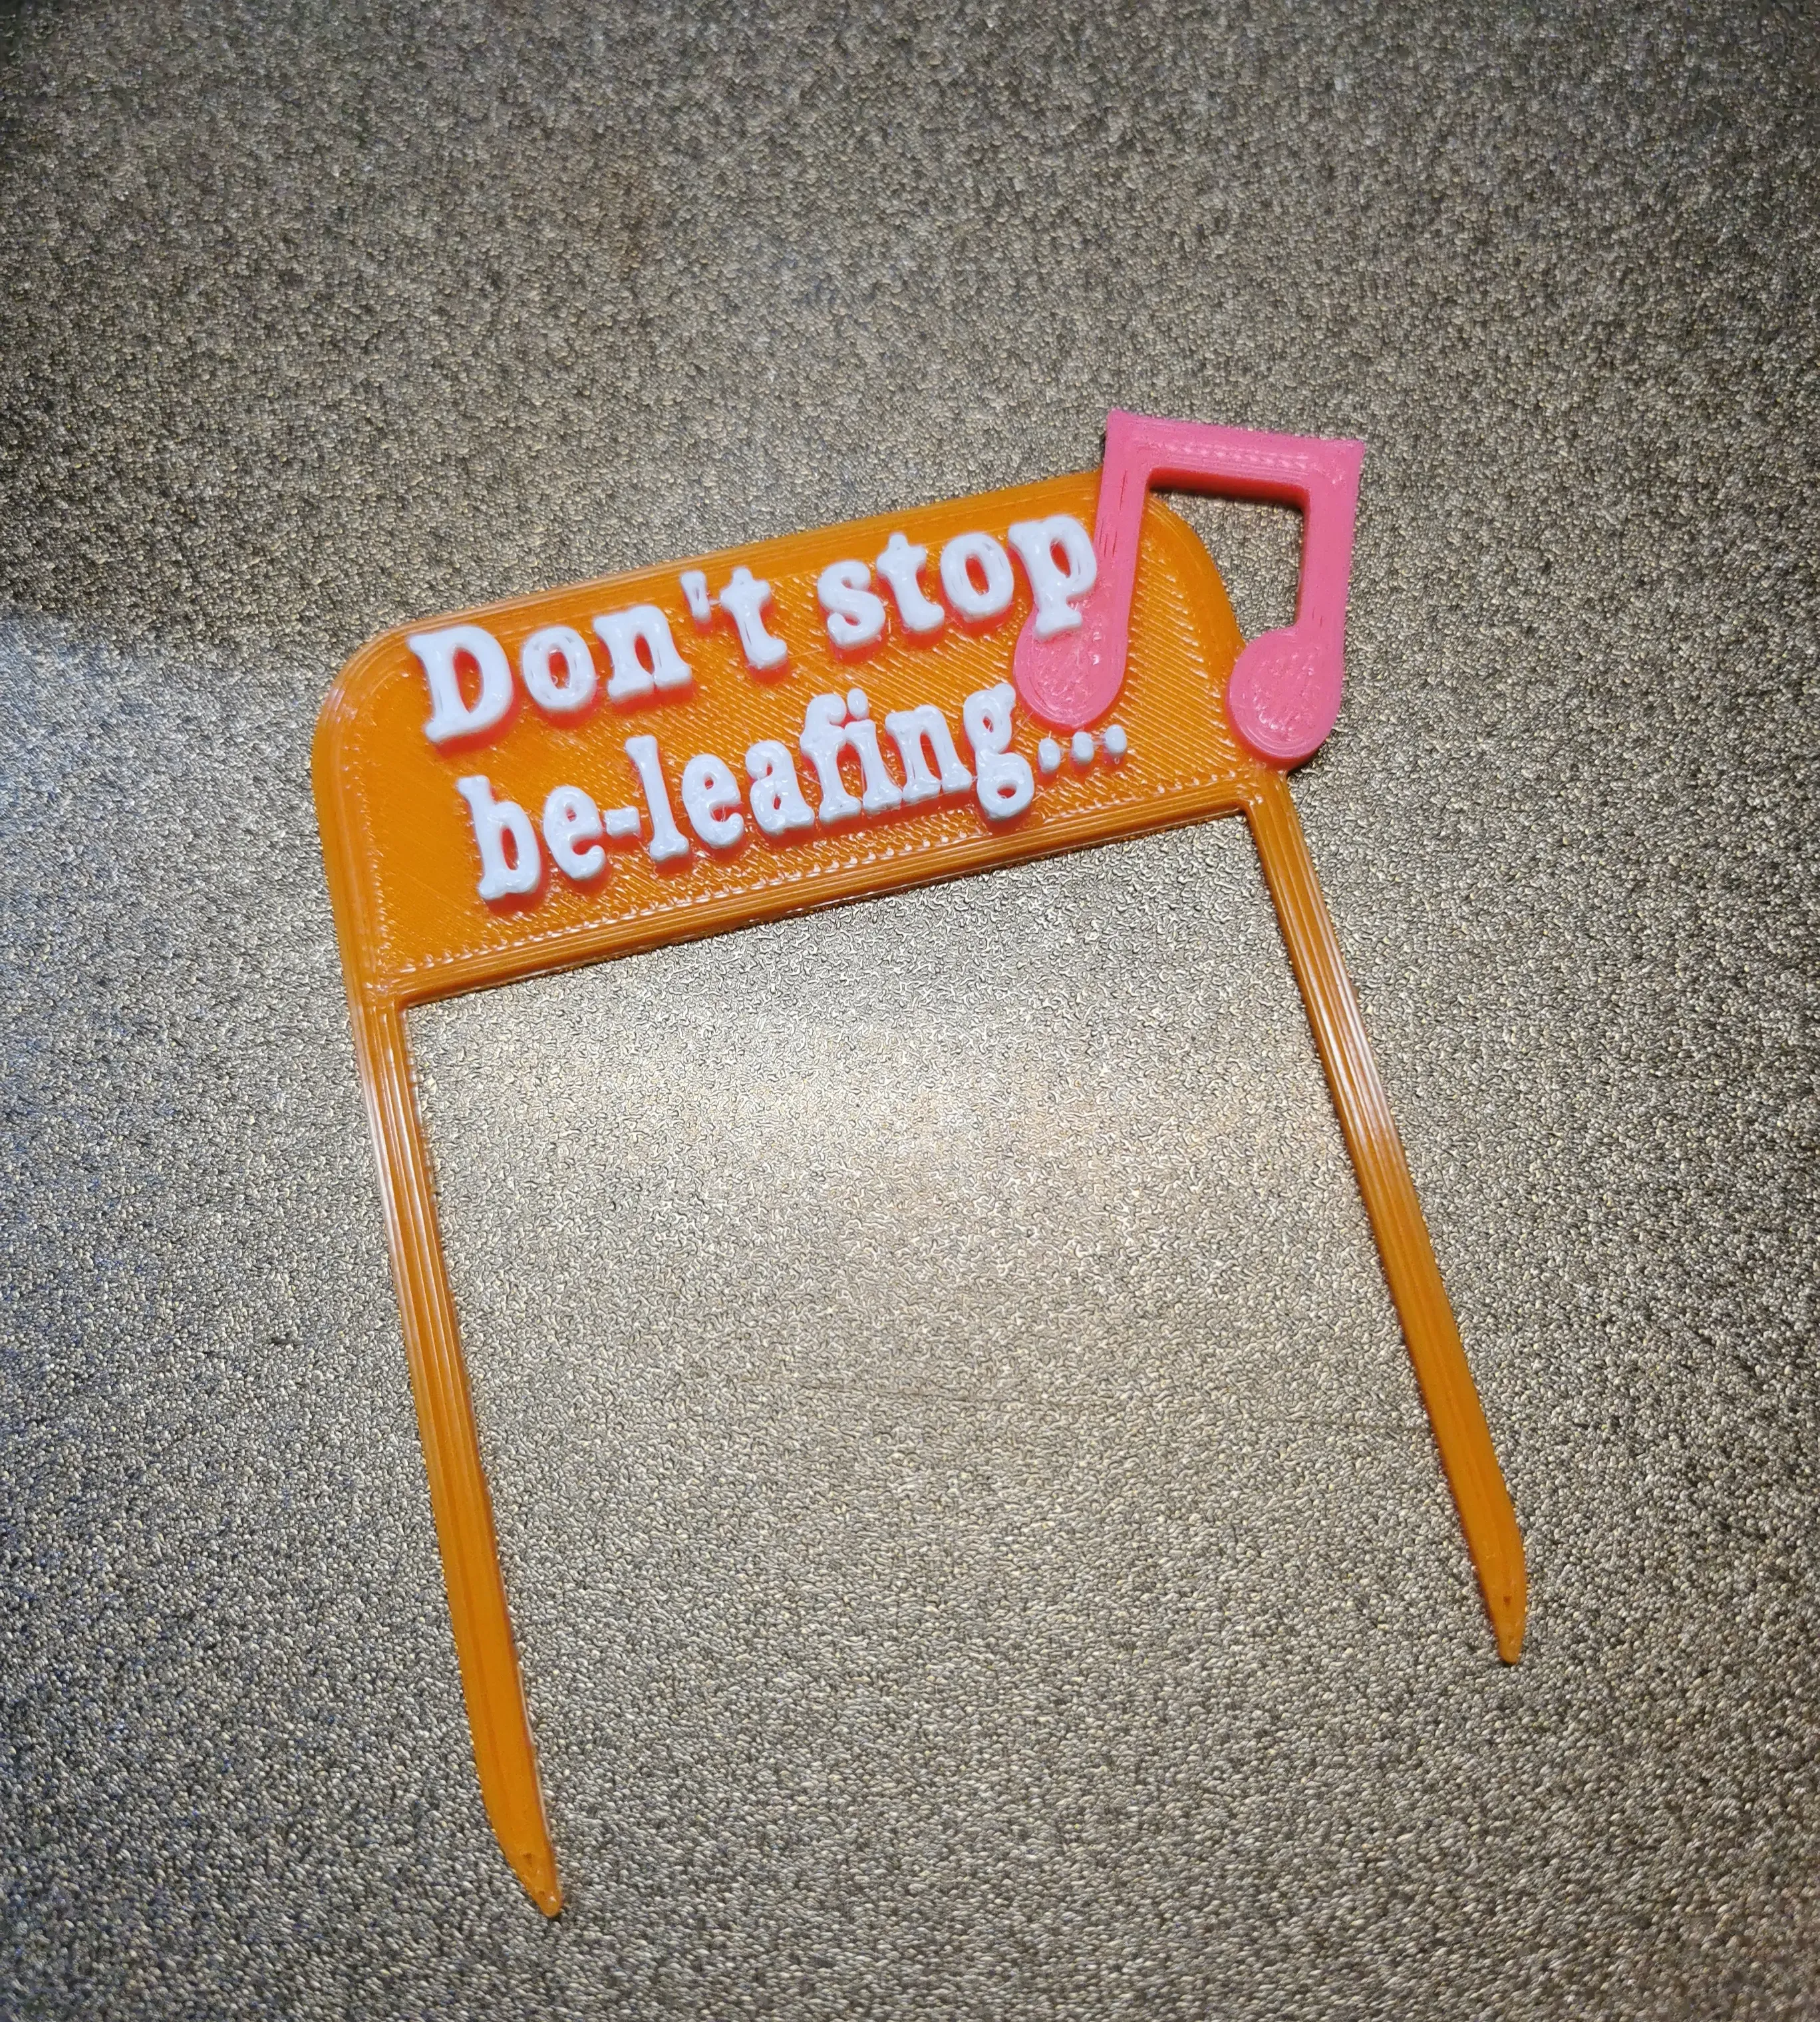 Don't Stop Be-Leafing - Funny Plant Pot Decoration